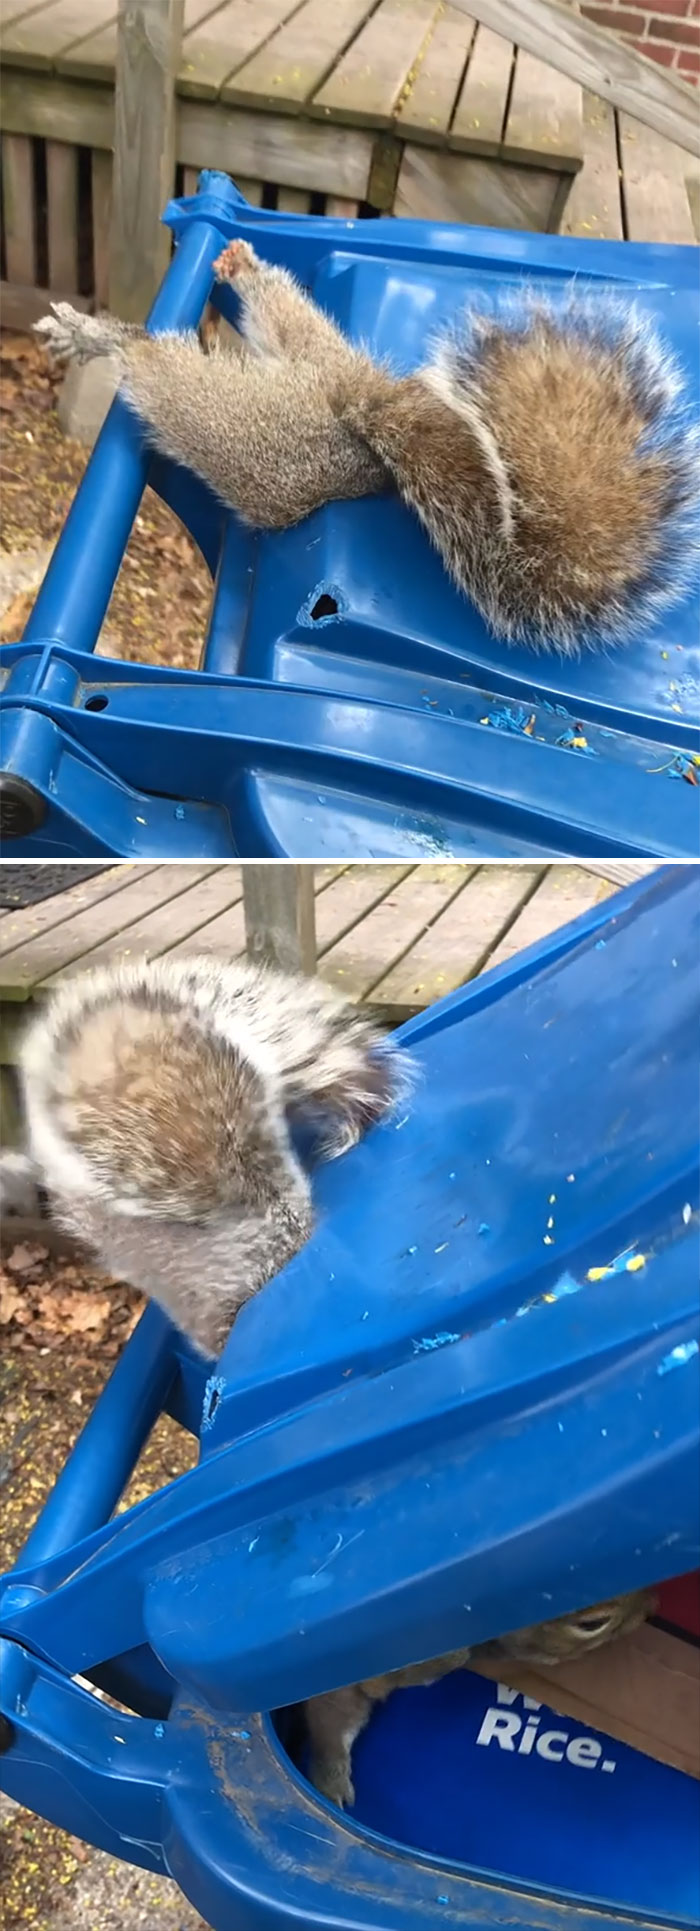 Found This Squirrel Butt Stuck In A Recycling Bin Today